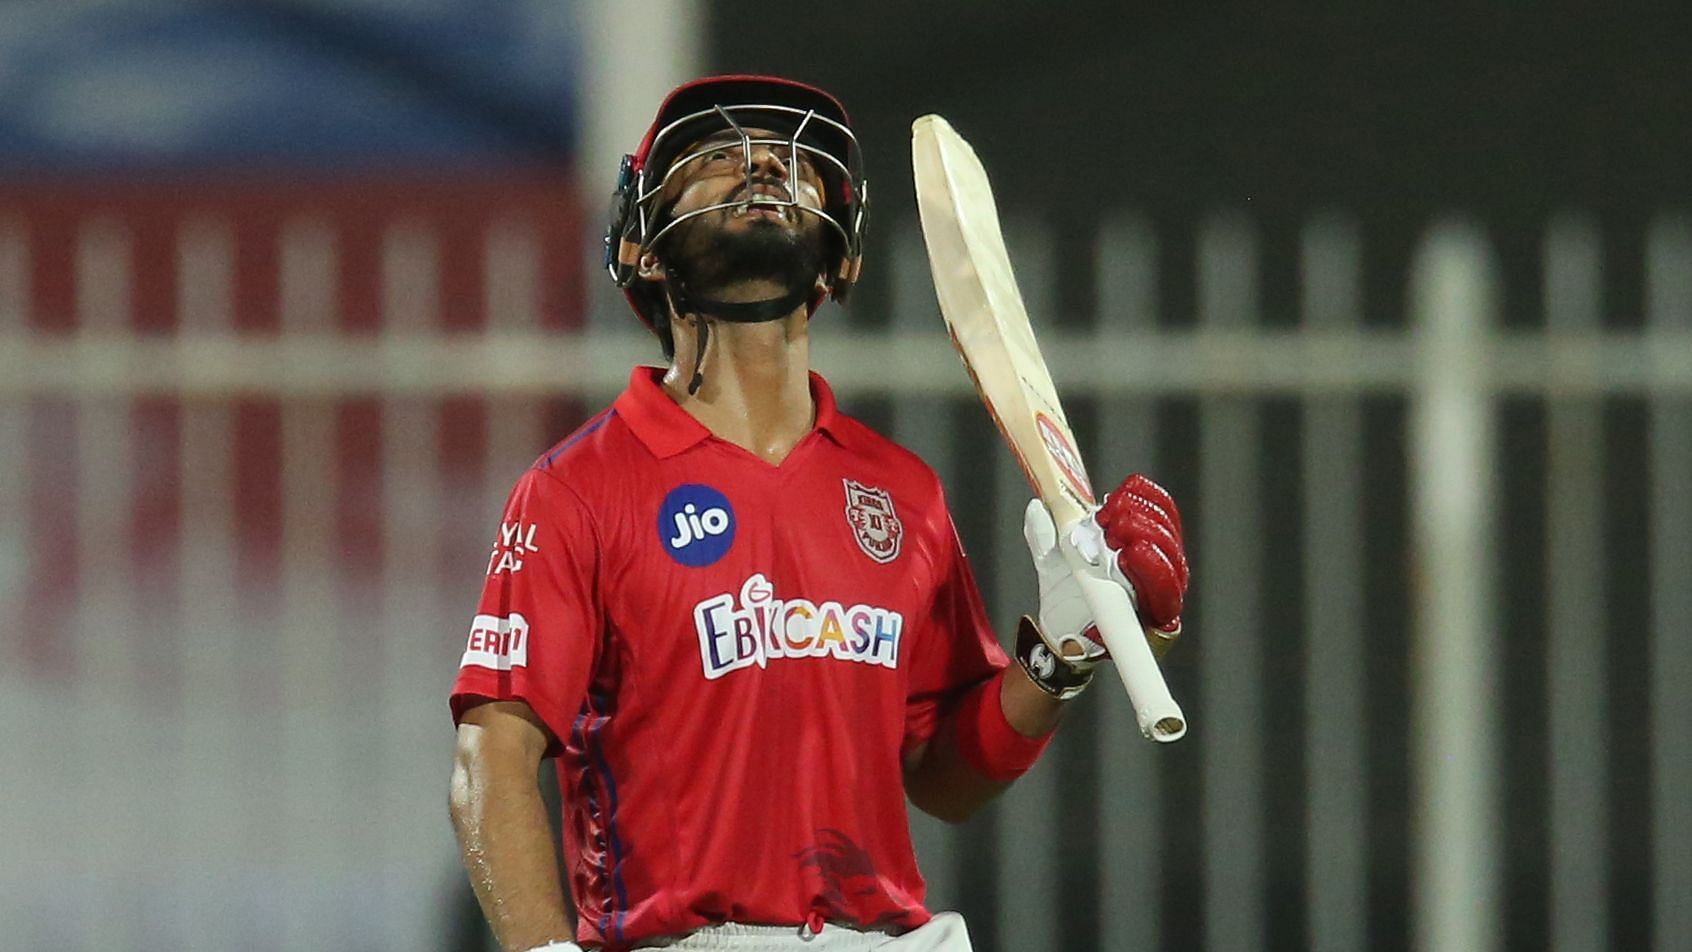 Mandeep Singh lost his father before KXIP’s last match. He scored a 66 on Monday night to help his team beat KKR. He remained not out.